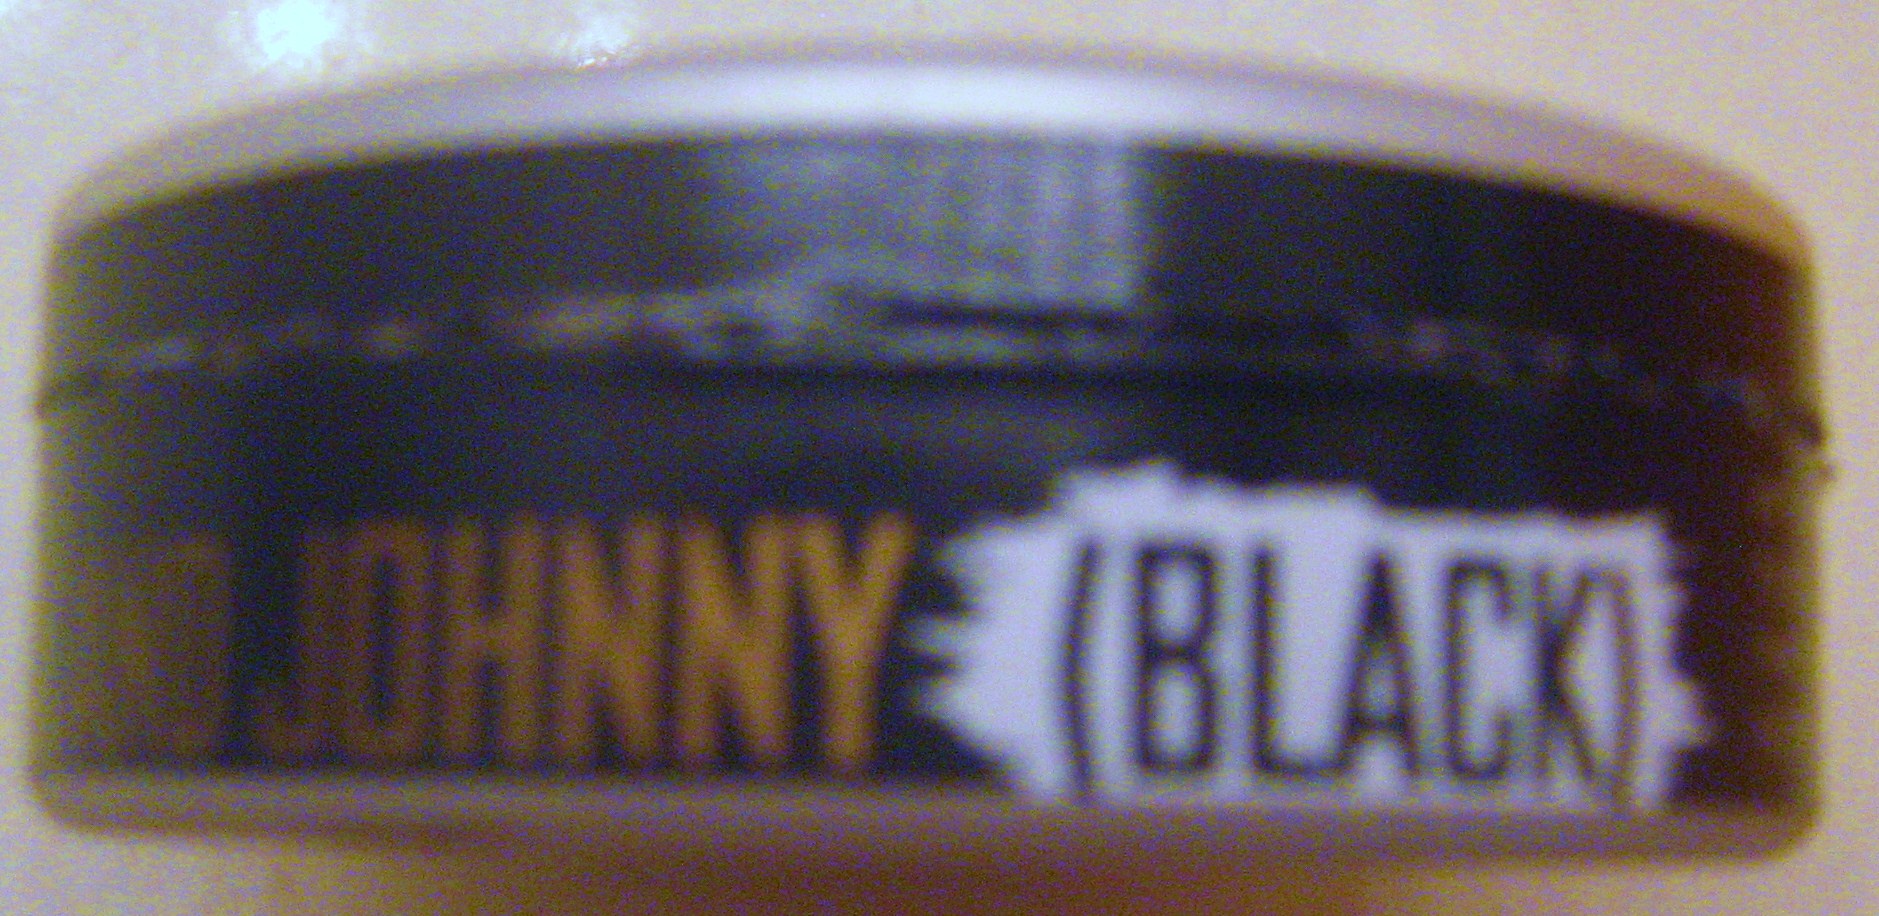 Nick and Johnny Black Strong Portion Snus will be available at the SnusCentral.com Snus Store